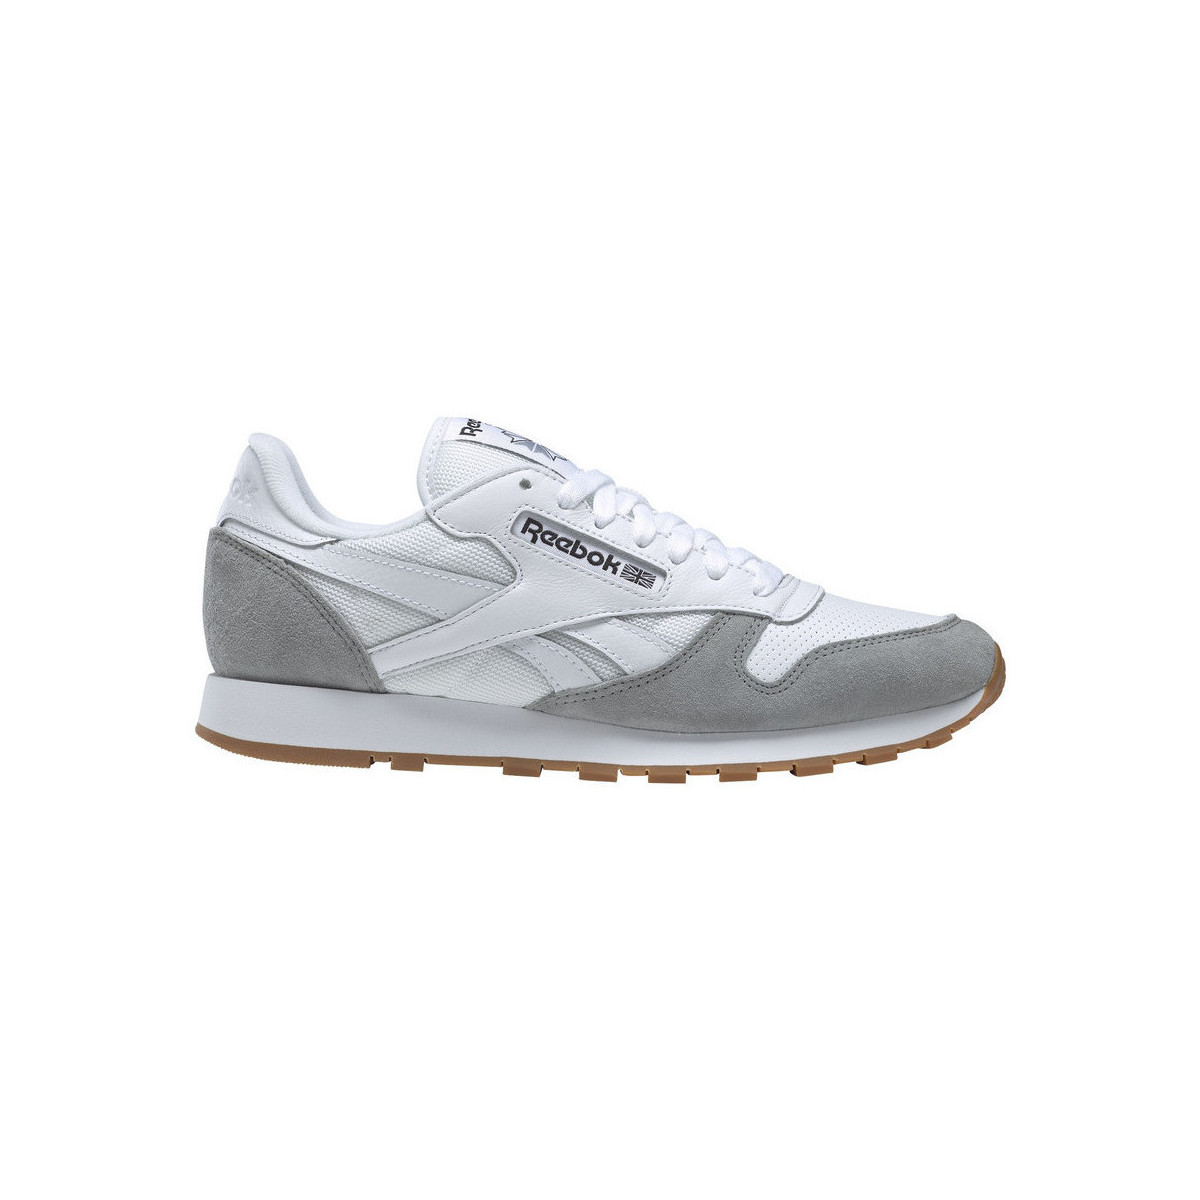 Chaussures Homme Scarpe Reebok Cl Legacy Az G55284 Pugry3 Chalk Frober CLASSIC LEATHER Blanc